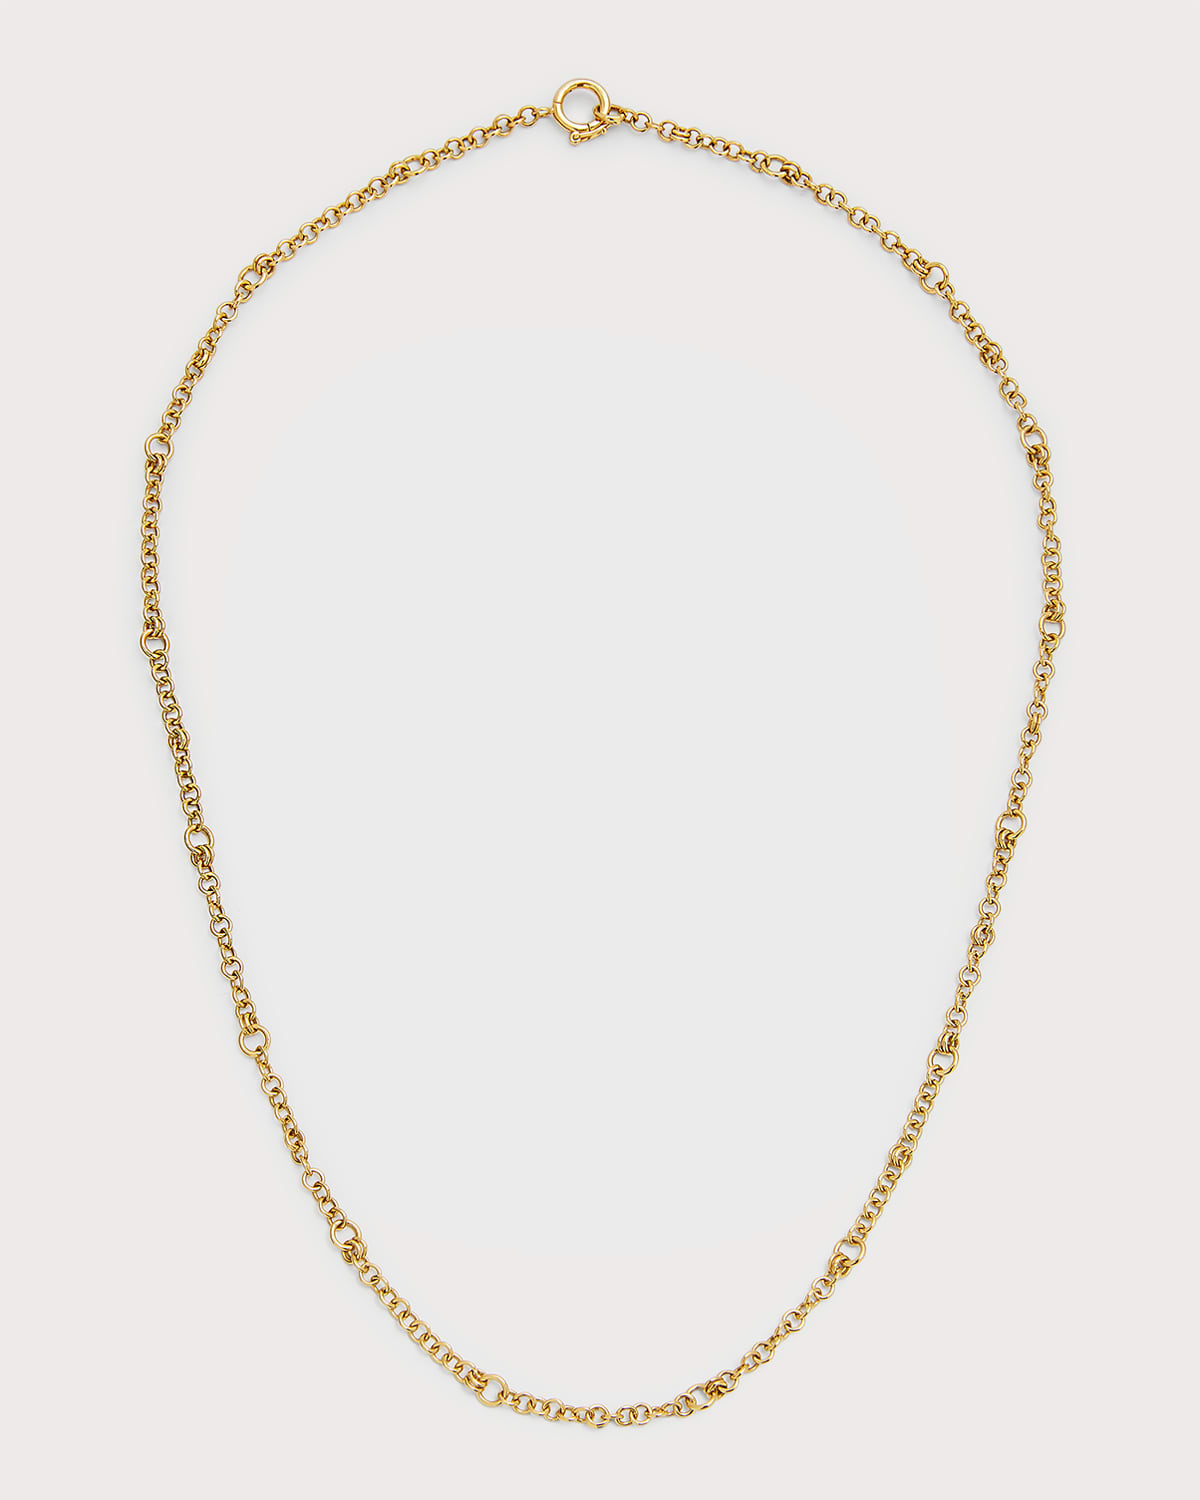 18k Yellow Gold Gravity Chain Necklace, 18"L